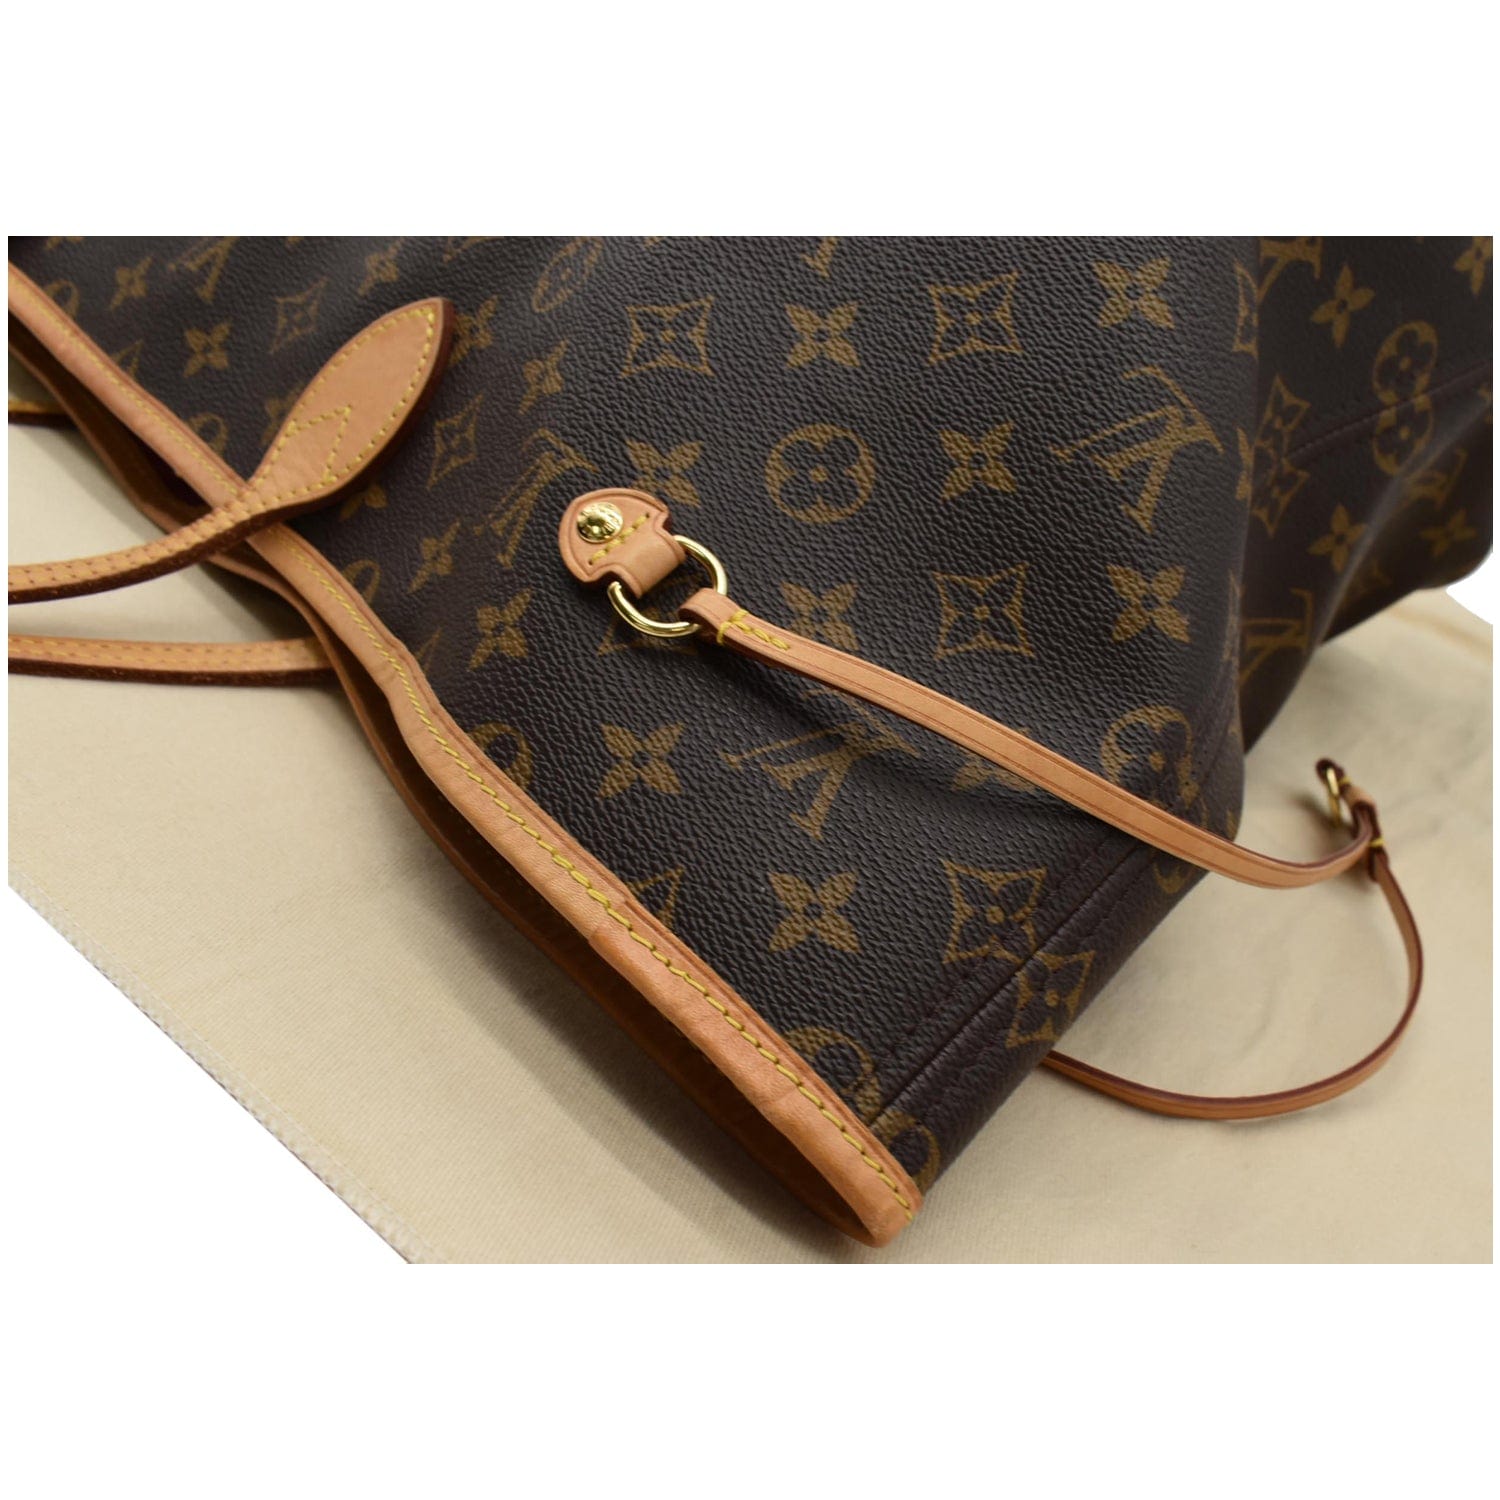 LOUIS VUITTON Neverfull GM Monogram Canvas Tote Bag Brown - 10% Off